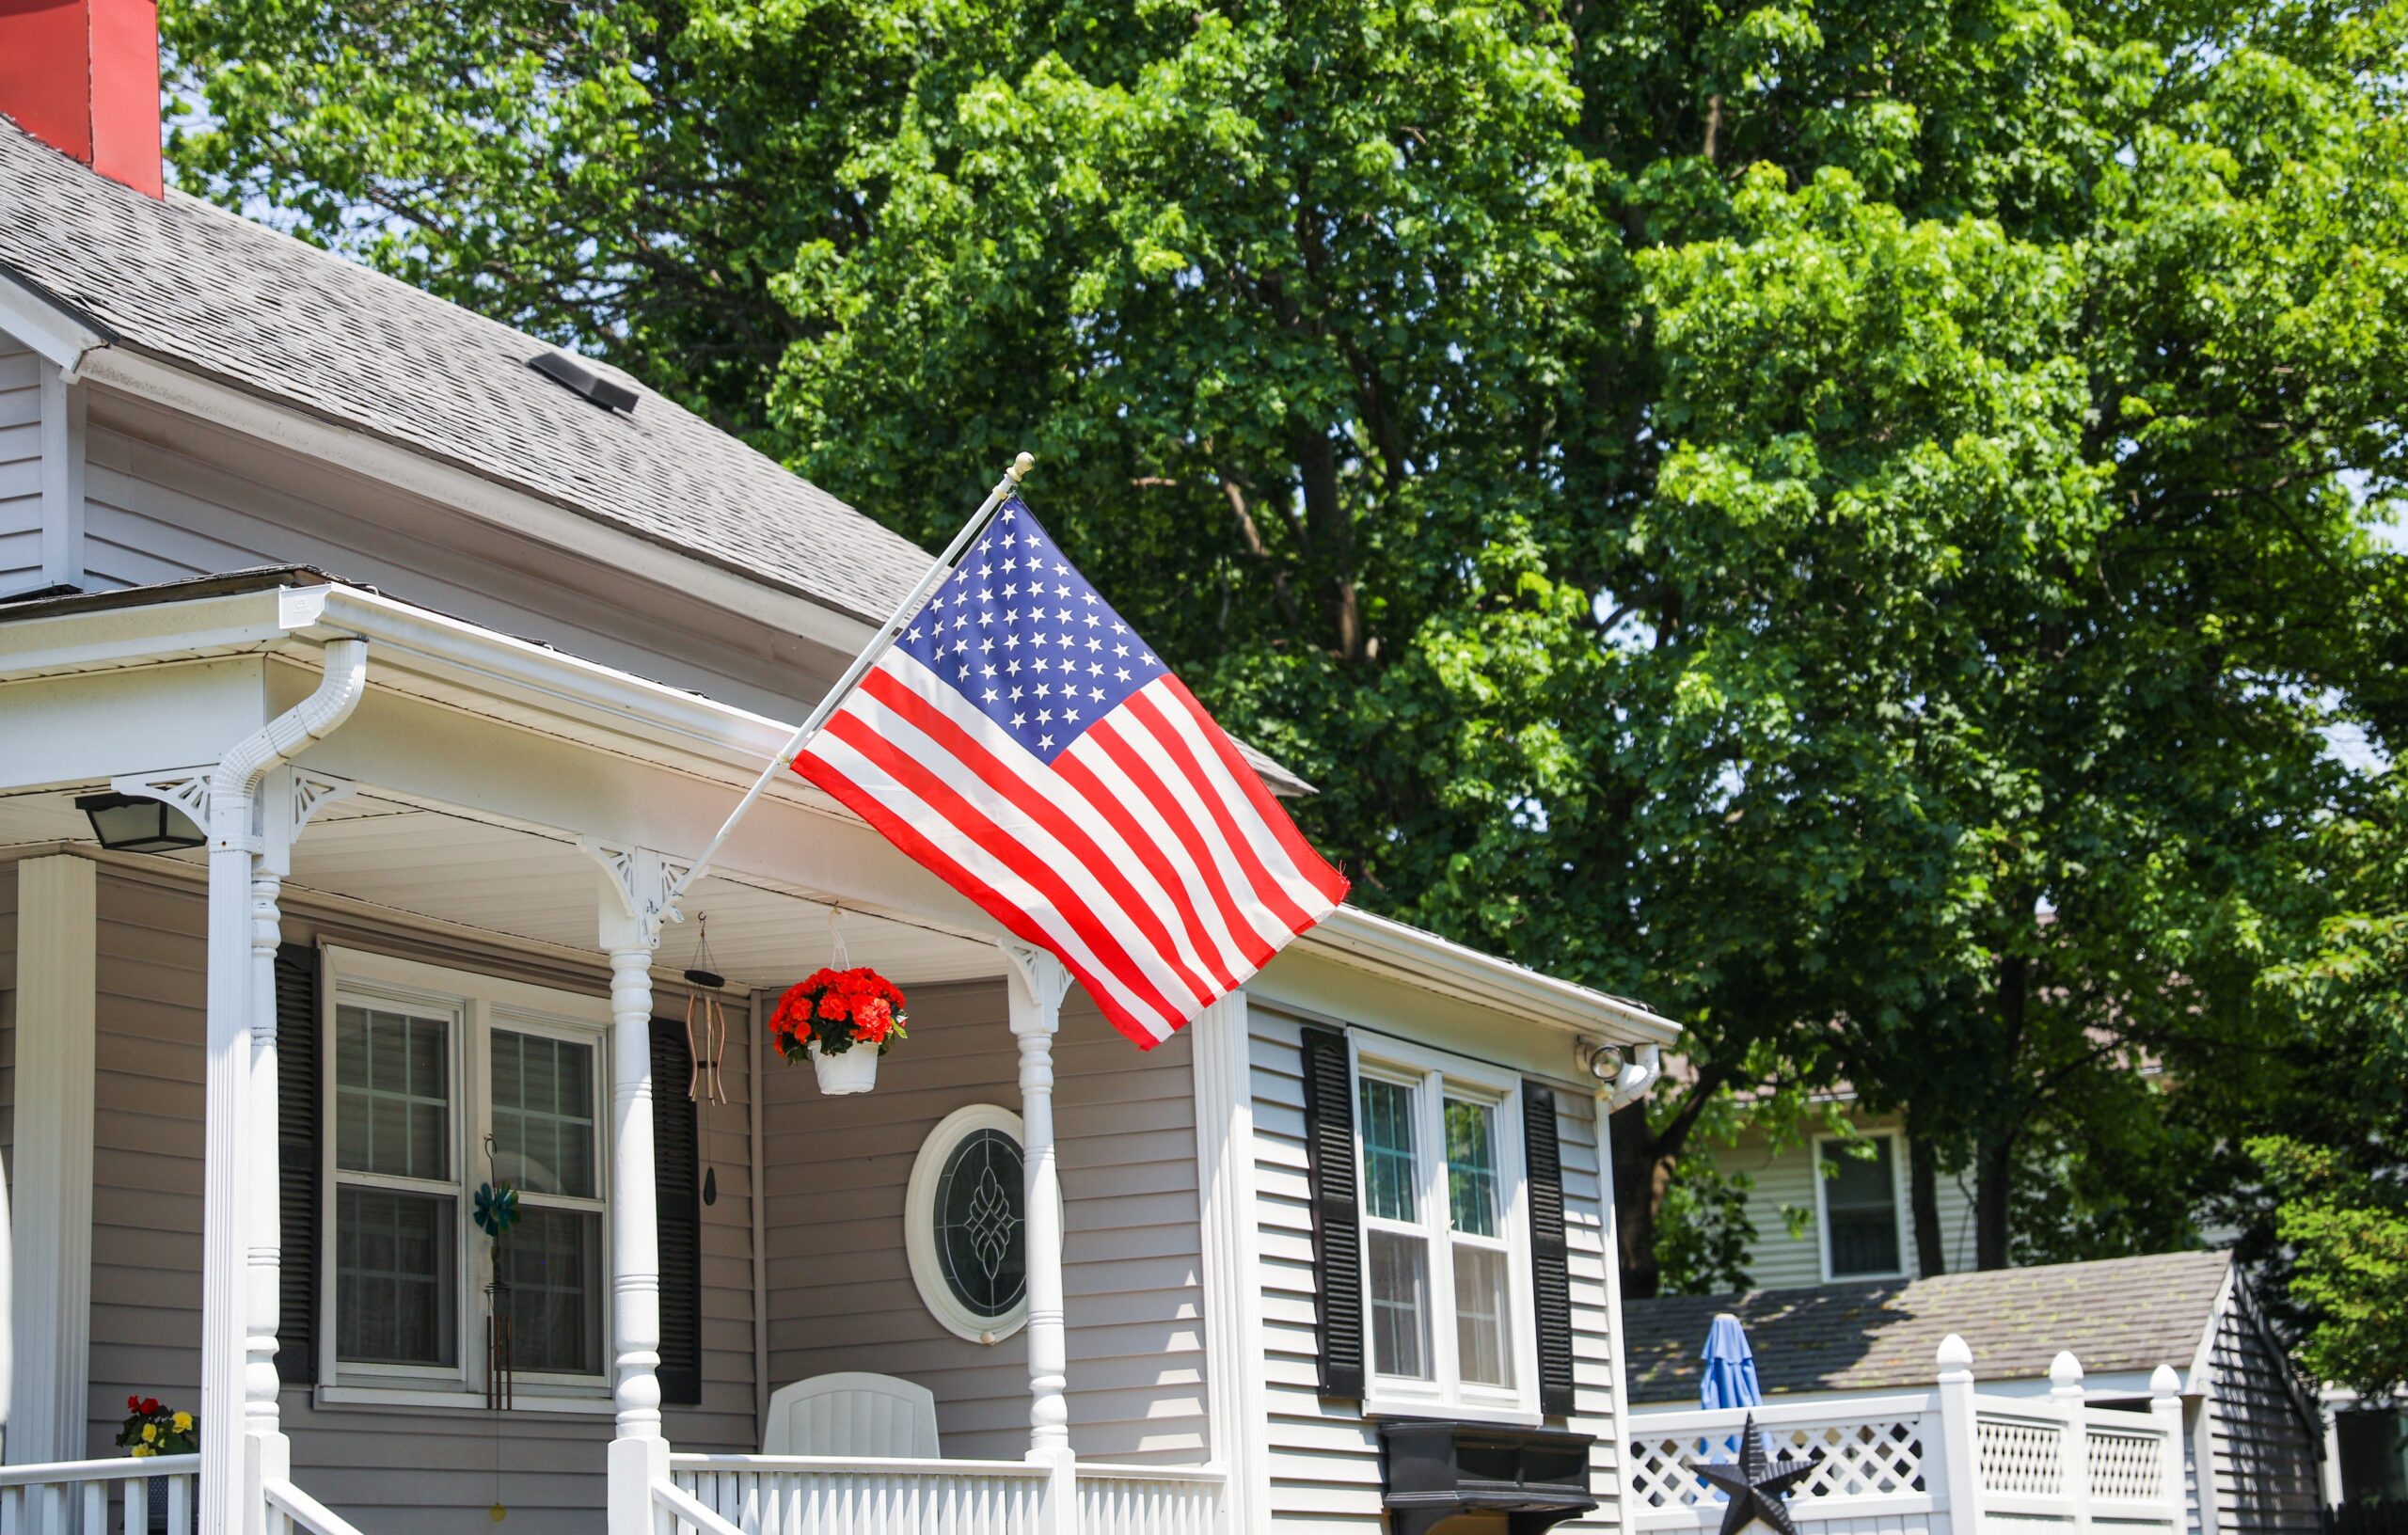 It's an election year, how will that affect home sales? call us today to find out! (614) 451-6616